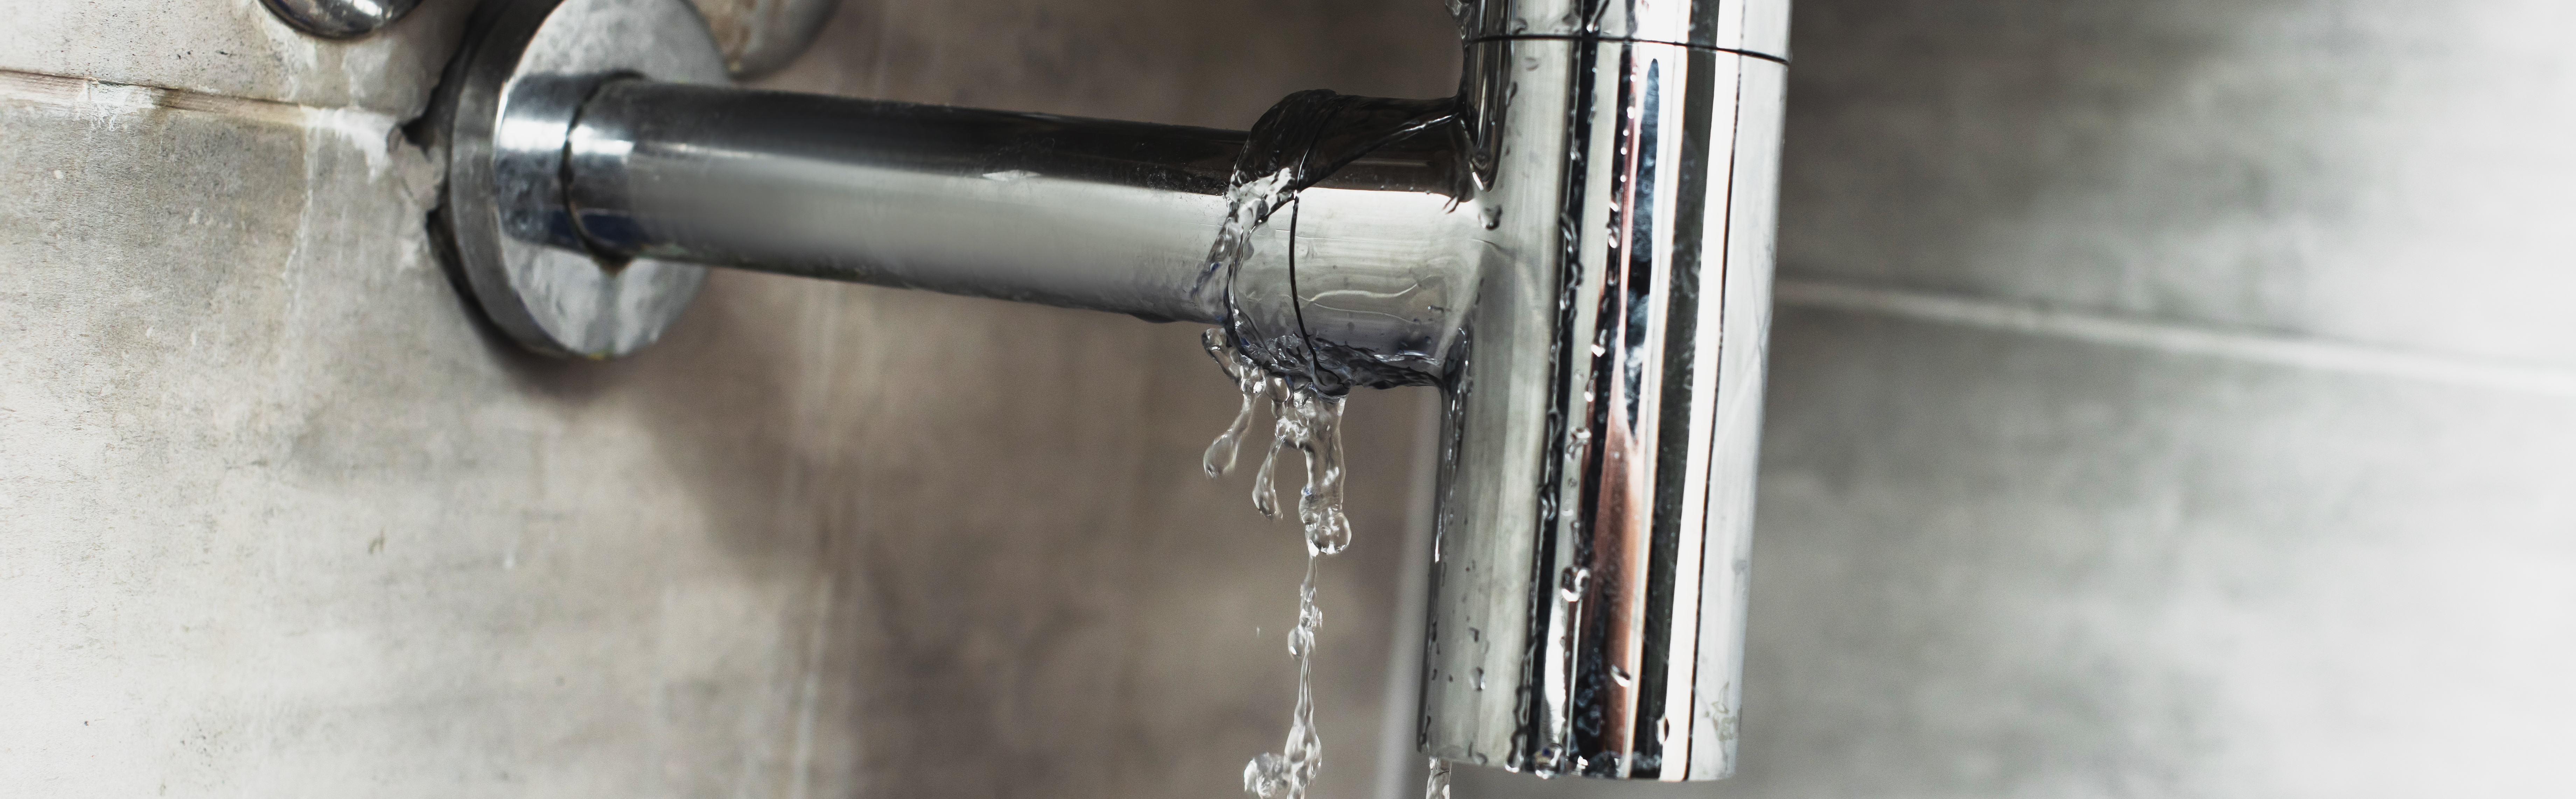 Leaky Pipes? Here are Some At-Home Solutions You Need